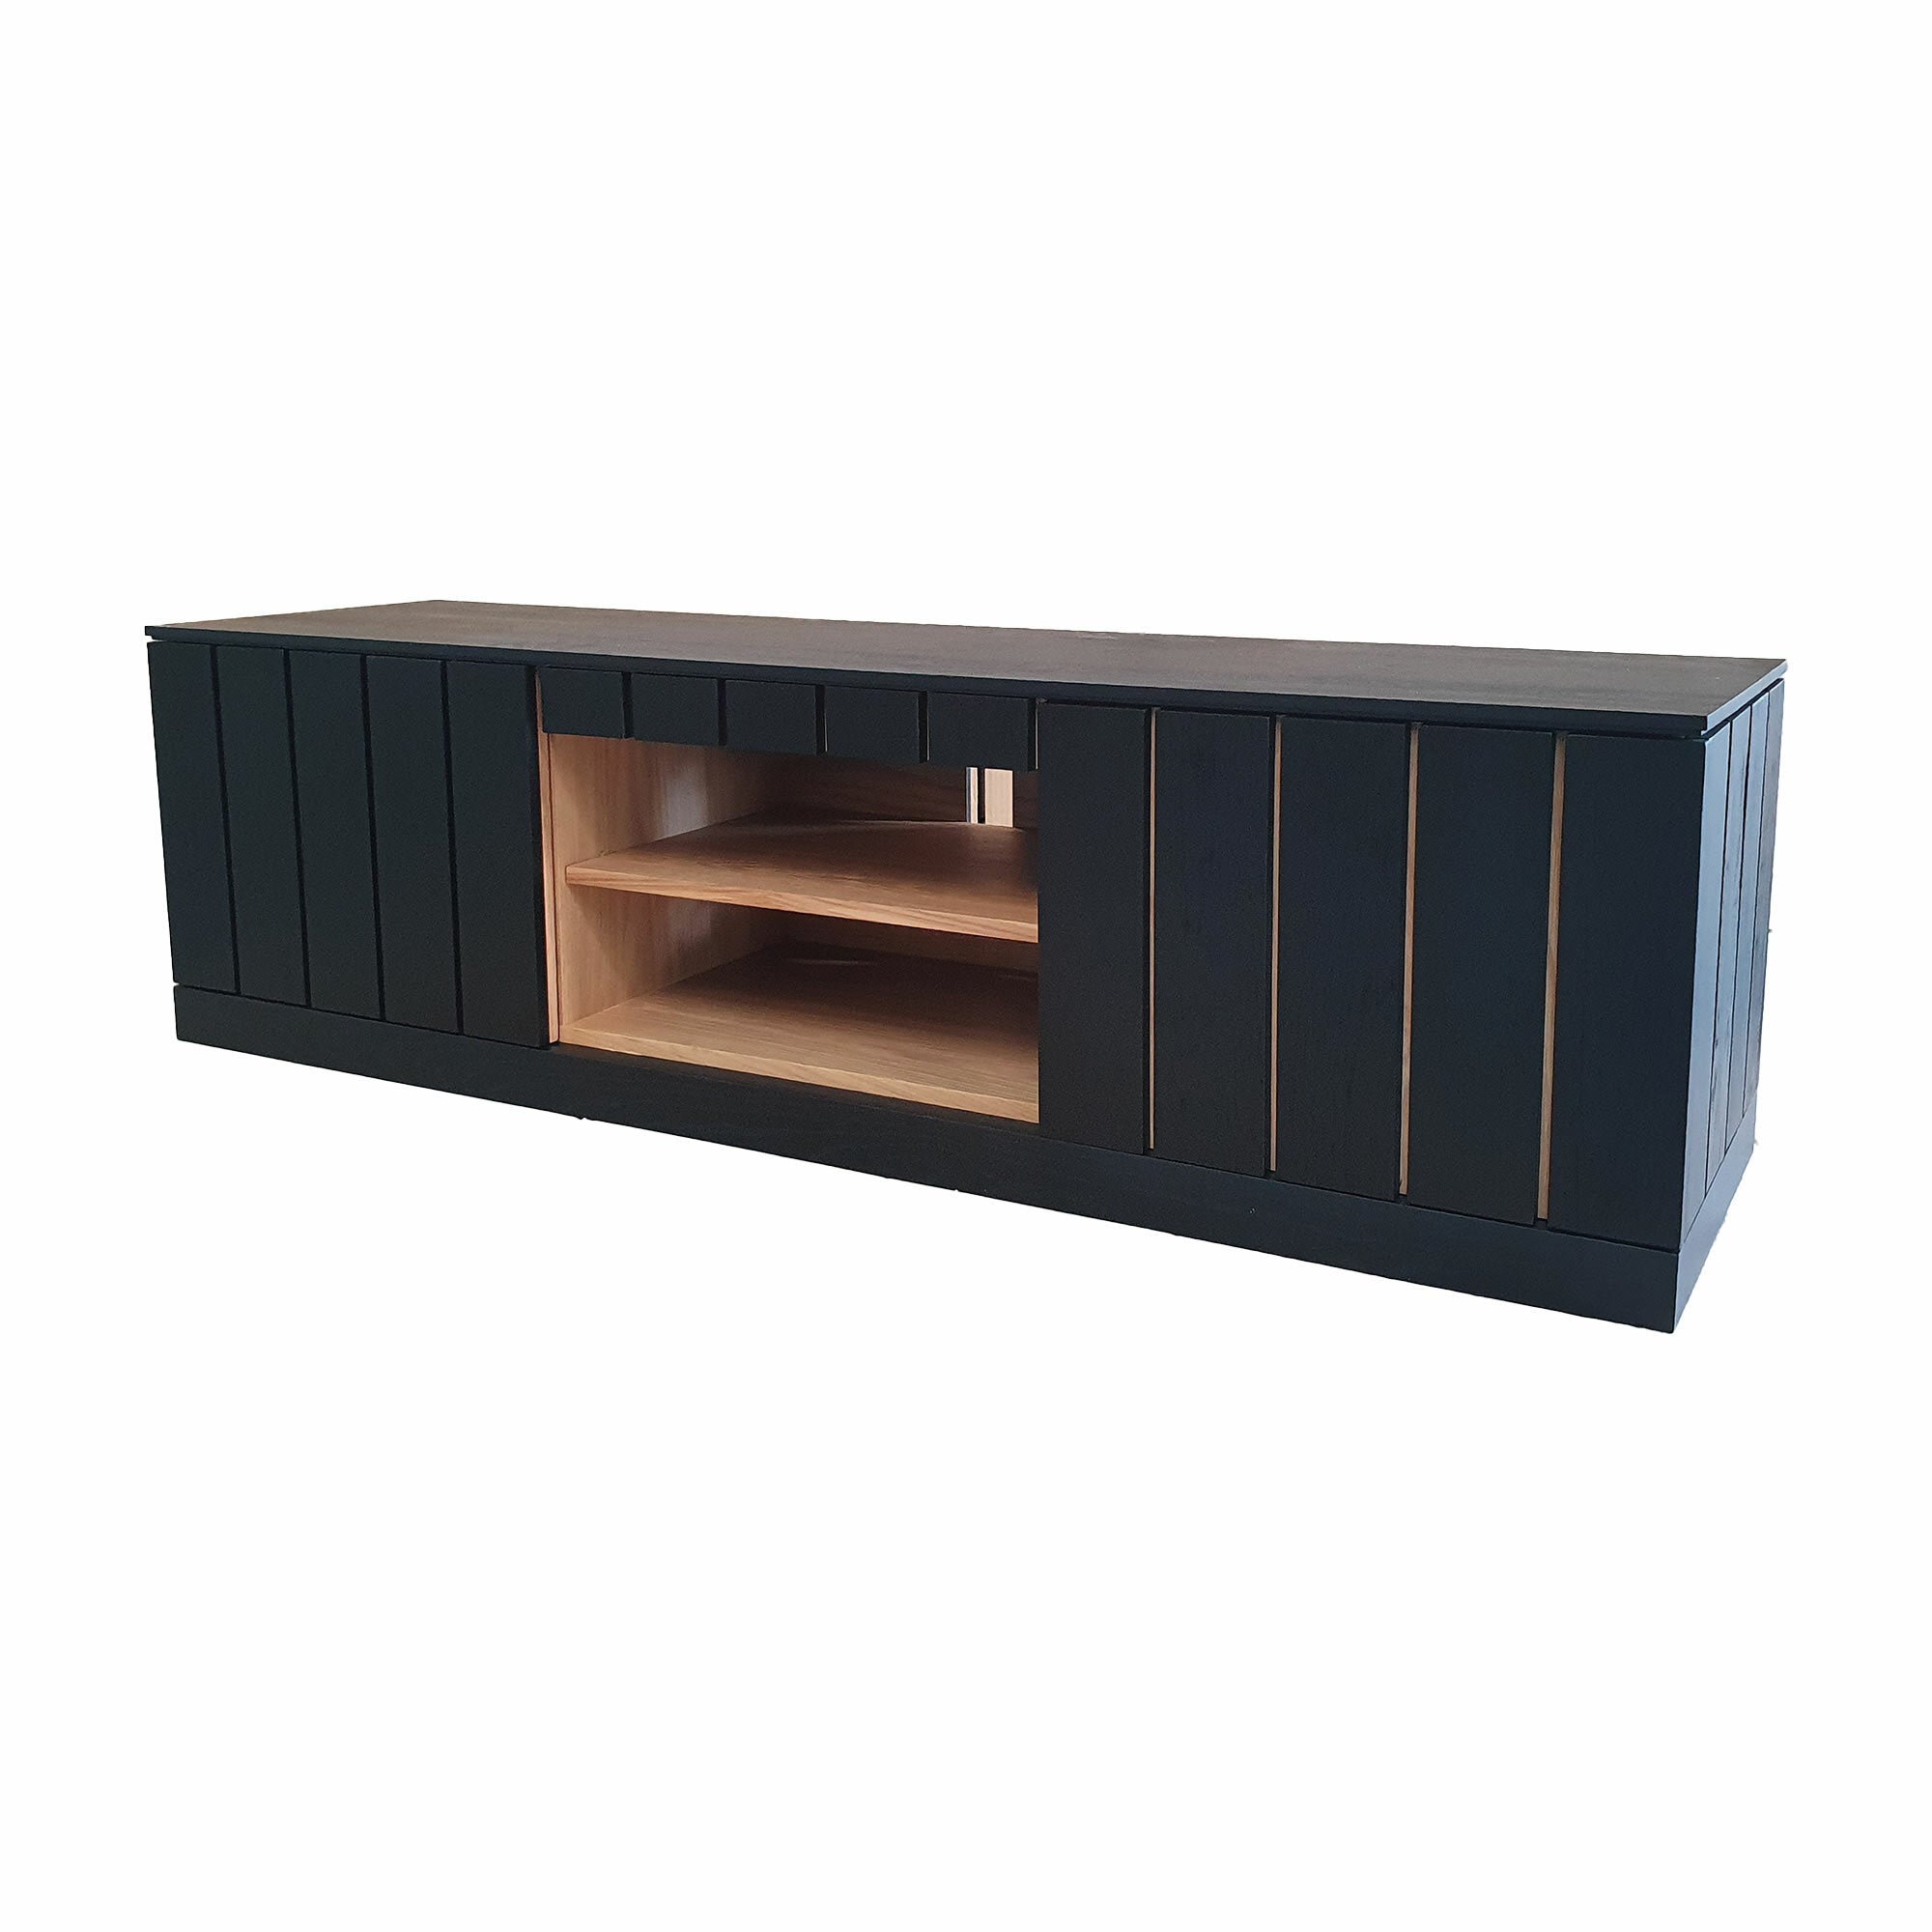 Piha TV Unit - Black Stained Oak Exterior with Natural Oak Interior